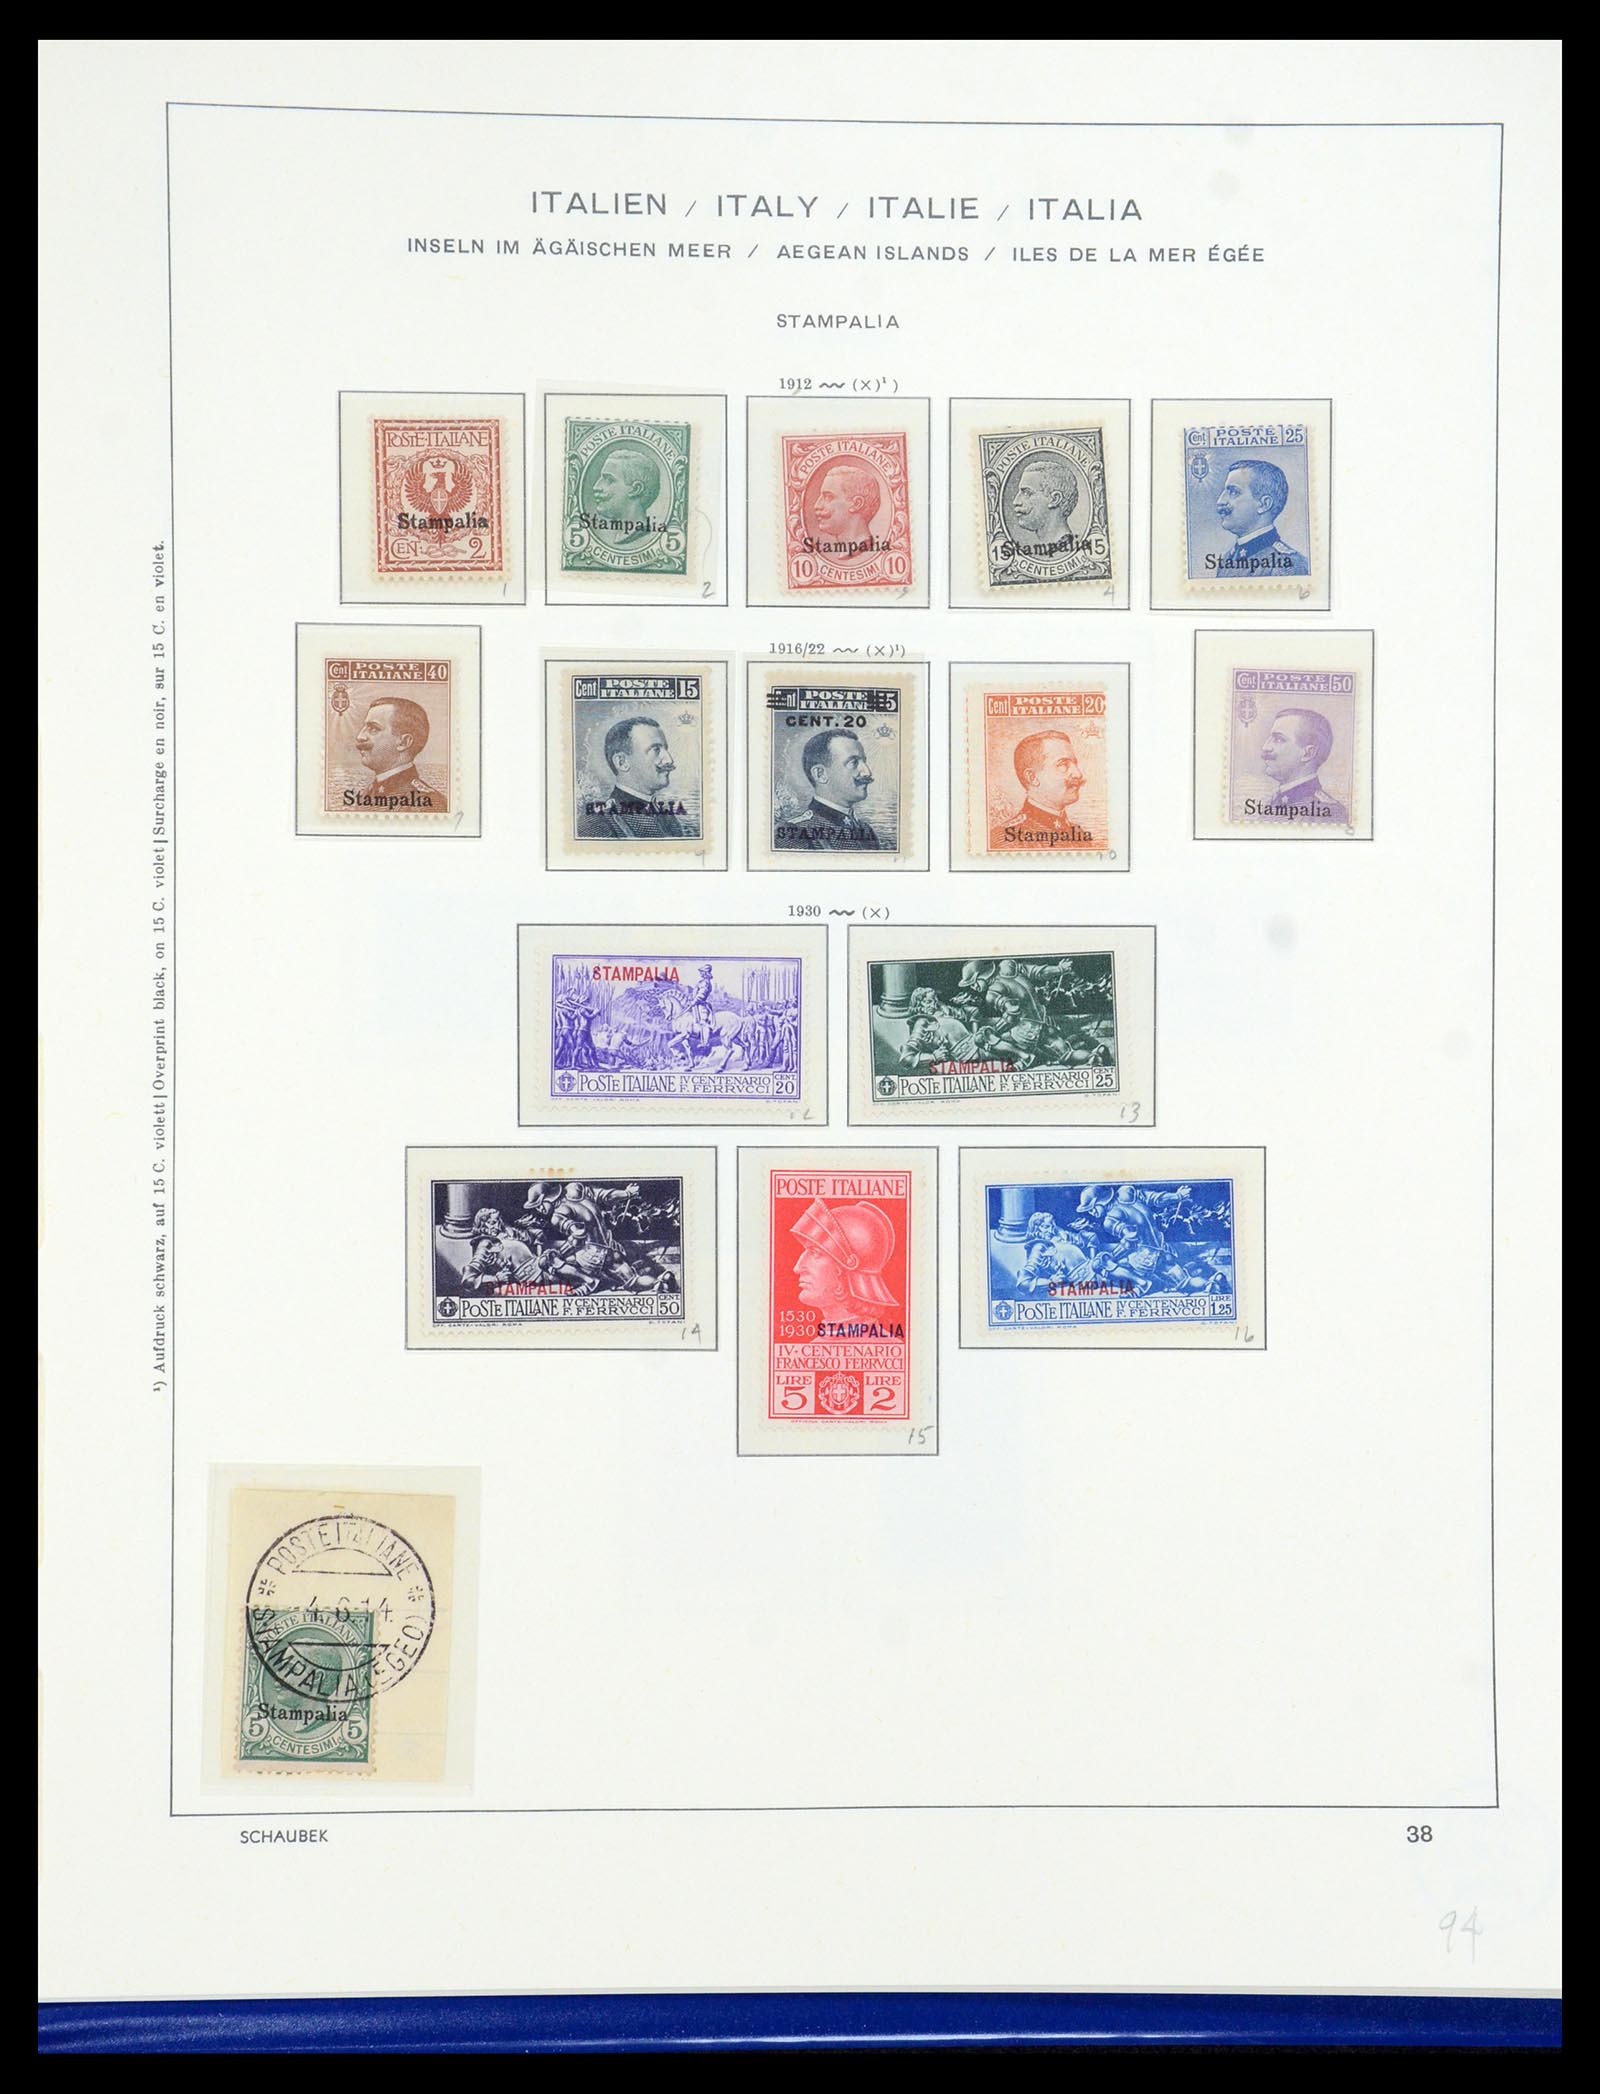 36181 053 - Stamp collection 36181 Italian Aegean Islands 1912-1941.